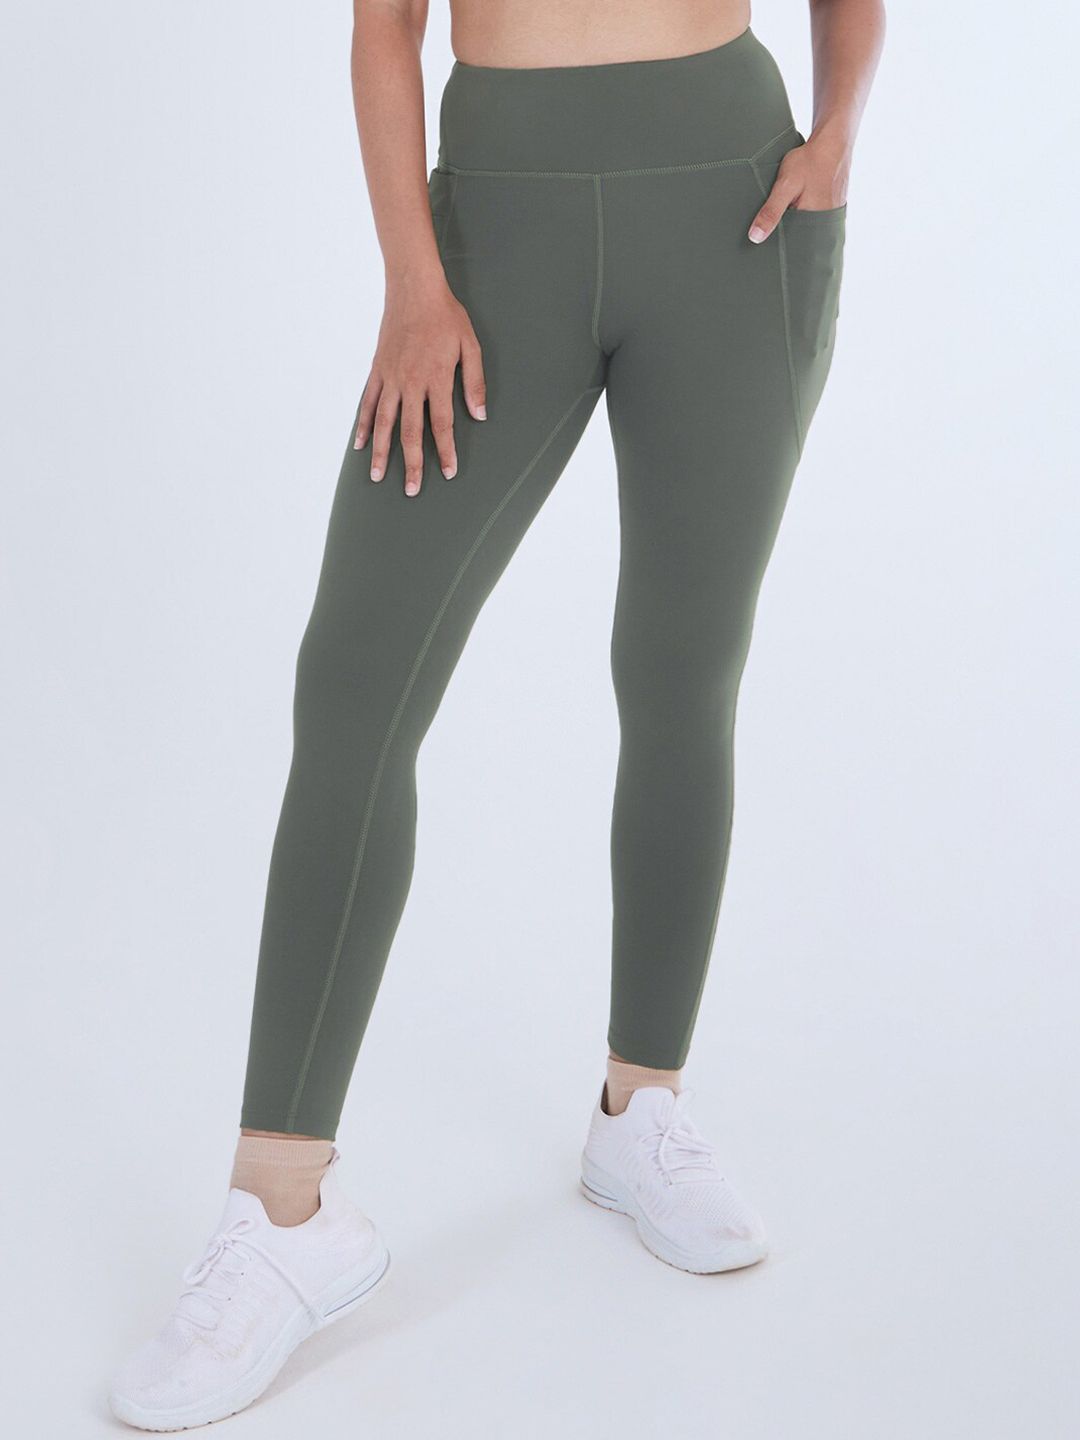 BlissClub Women Olive High Waist Pocket Goals Leggings with 6 Pockets Price in India